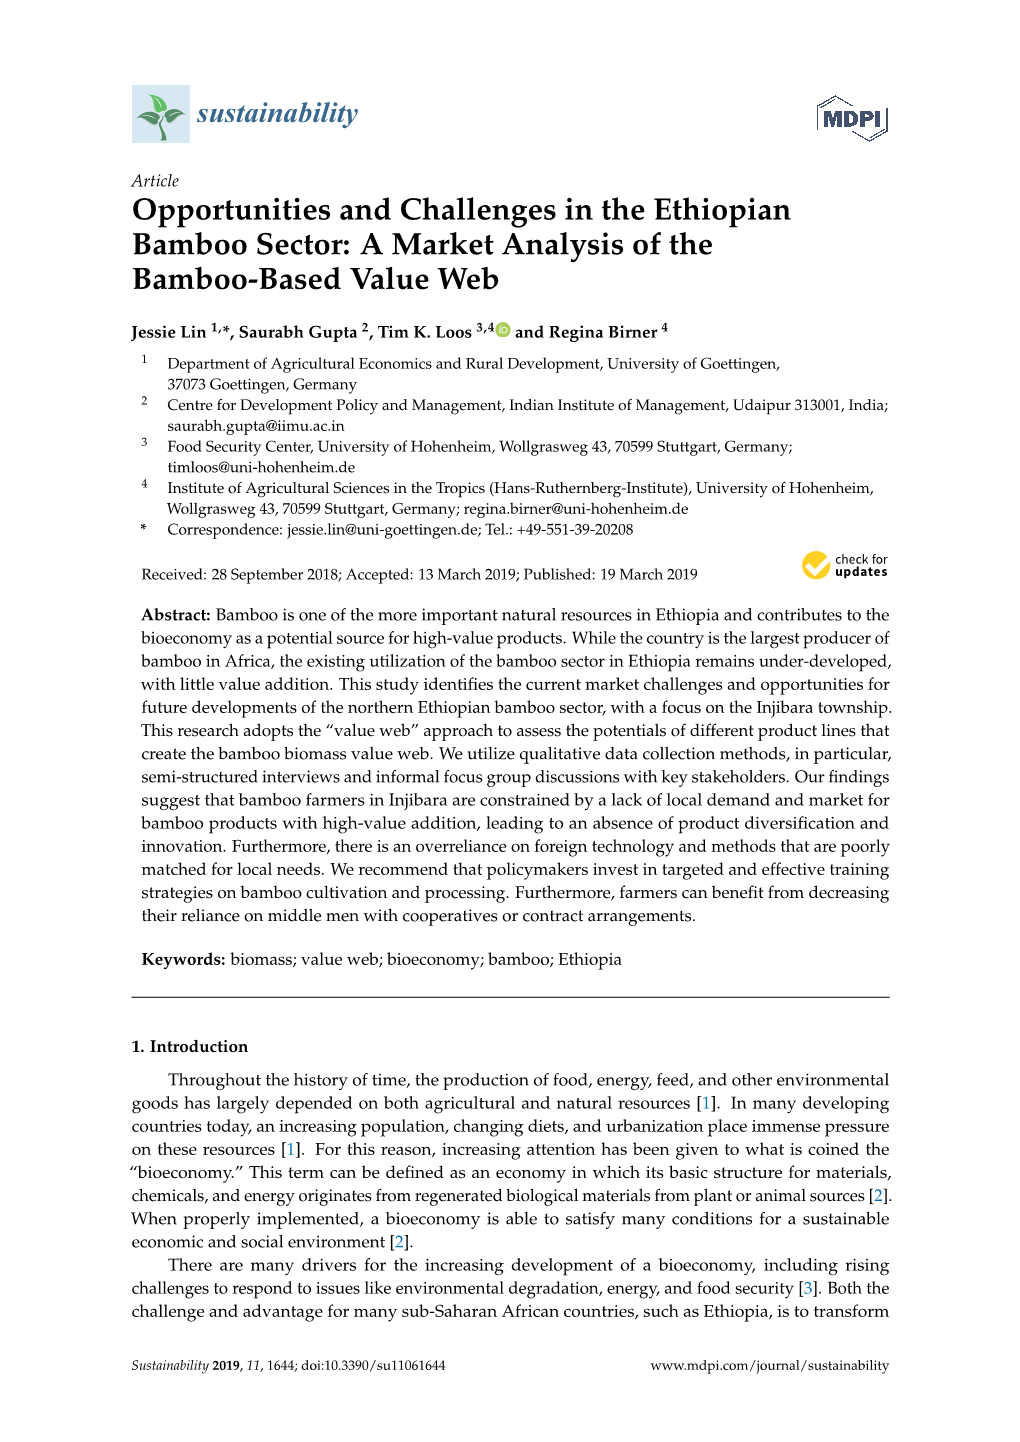 Opportunities and Challenges in the Ethiopian Bamboo Sector: a Market Analysis of the Bamboo-Based Value Web